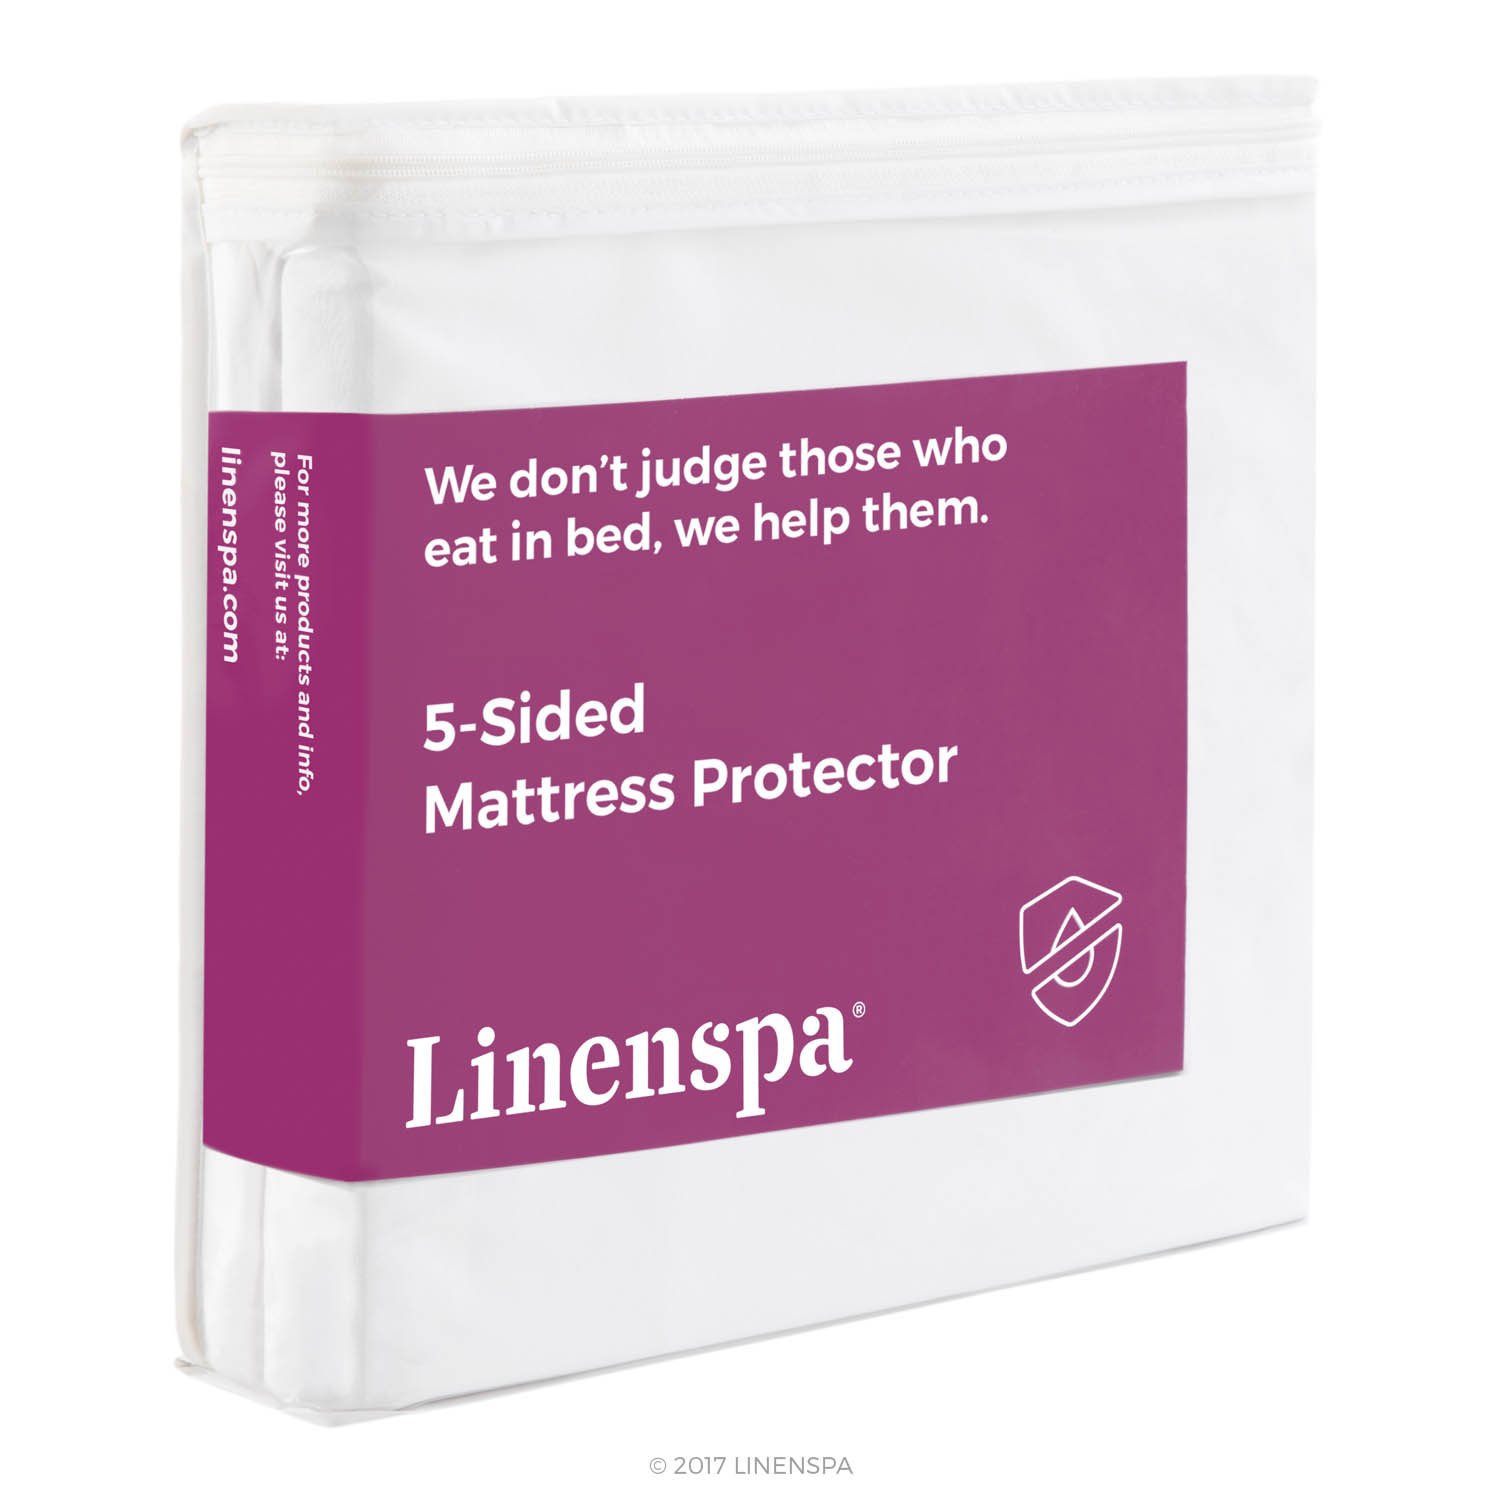 Book Cover Linenspa Premium Fabric Mattress Protector-100 Protector-Waterproof-Hypoallergenic-Vinyl Free, California King, Smooth 5-sided